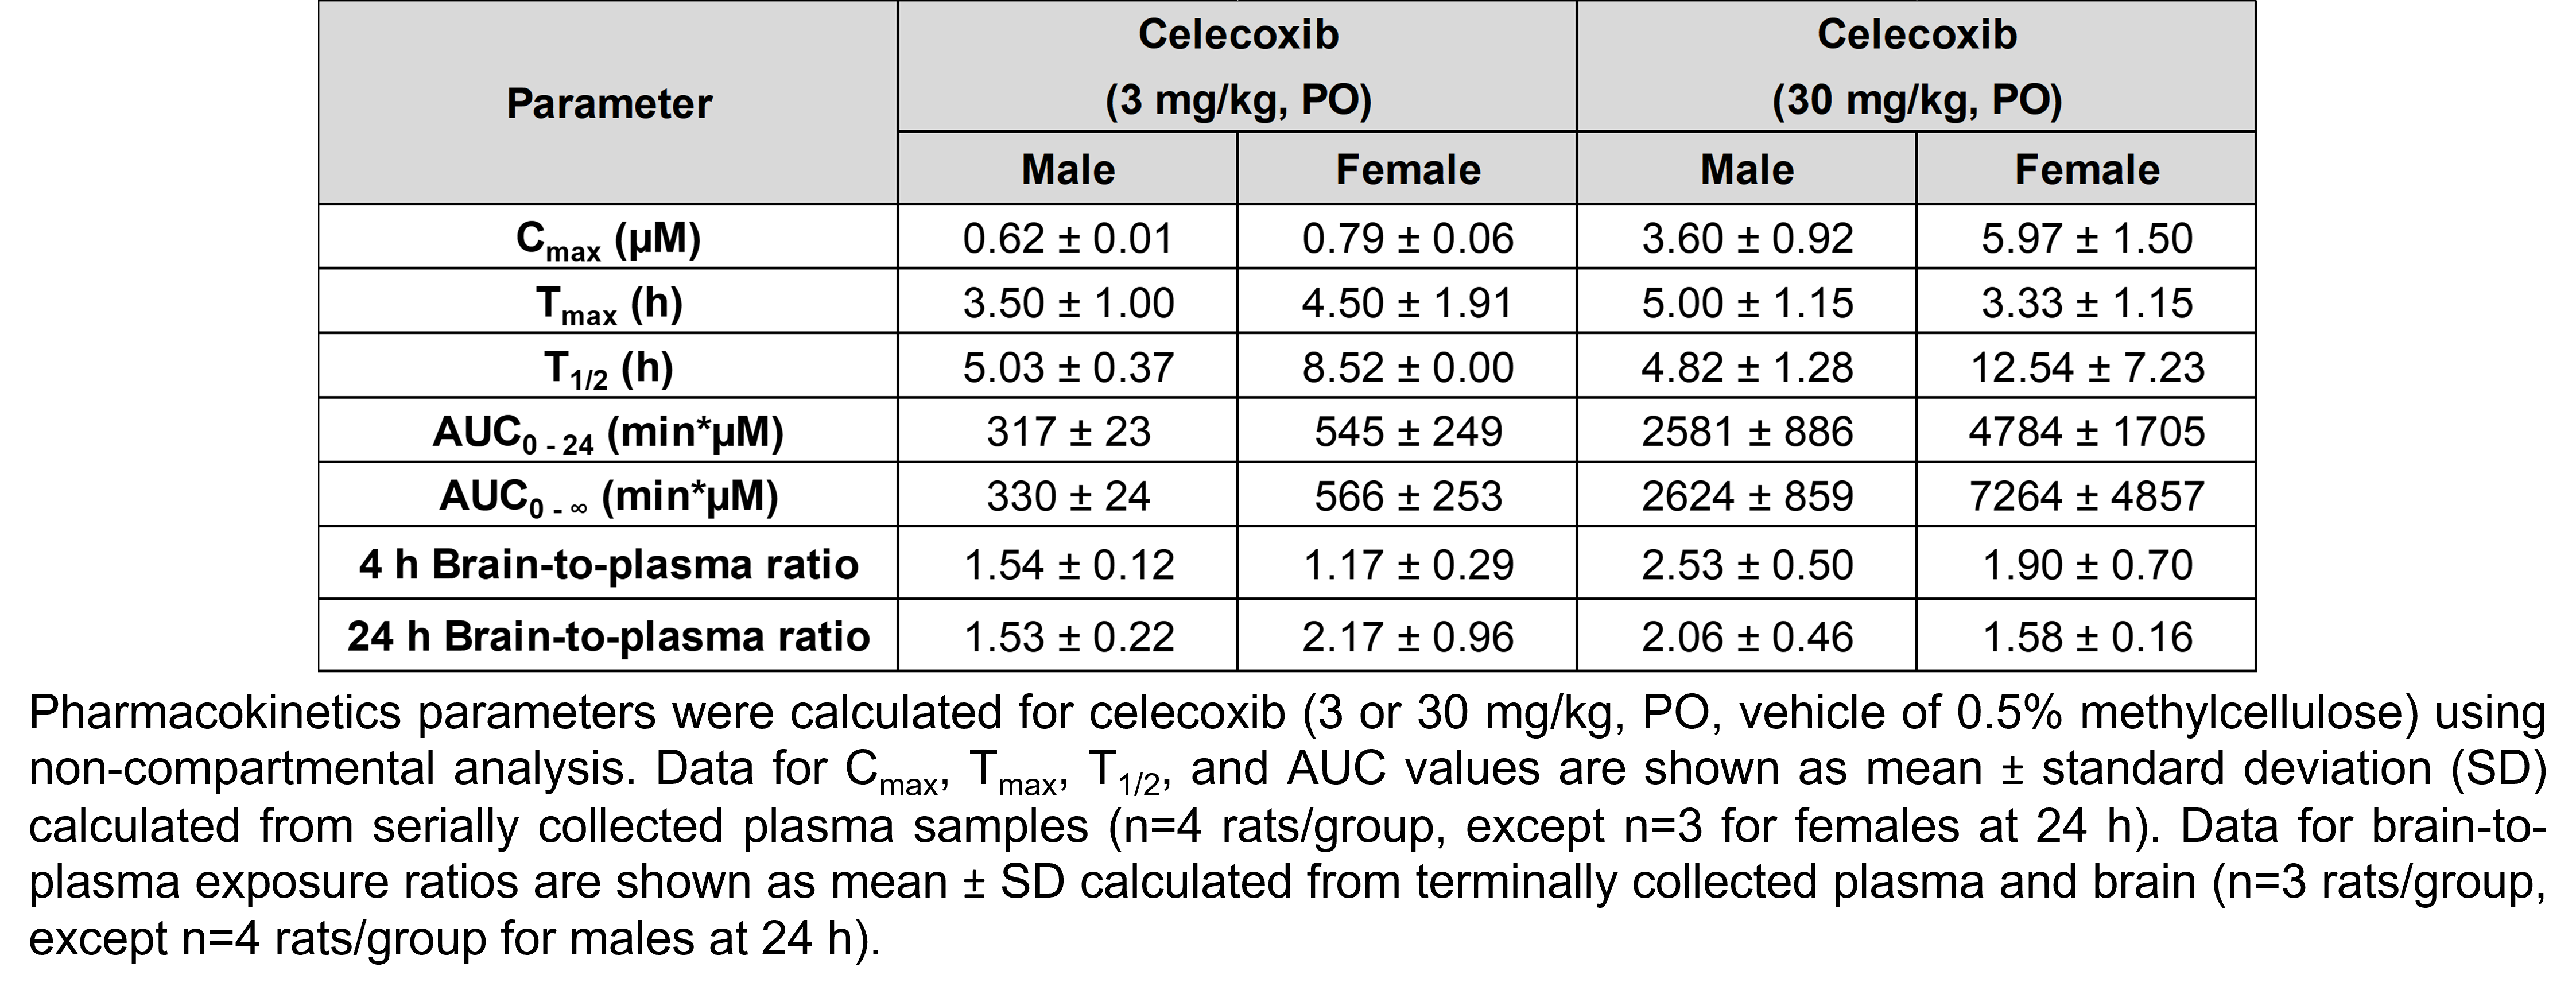 A table shows pharmacokinetics parameters calculated for celecoxib using non-compartmental analysis in male and female rats treated with celecoxib (3 or 30 mg/kg, PO, vehicle of 0.5% methylcellulose). The means for the 4 groups (males and females treated with 3 mg/kg celecoxib and males and females treated with 30 mg/kg celecoxib, respectively) are as follows. The highest concentration (Cmax) was 0.62, 0.79, 3.6, and 5.97 µM; the time at the maximum concentration (Tmax) was 3.5, 4.5, 5, and 3.33 hours; the half-life (T1/2) was 5.03, 8.52, 4.82, and 12.54 hours; area under the curve for time 0 to 24 hours was 317, 545, 2581, and 4784 minutes*µM; area under the curve for time 0 to infinity was 330, 566, 2624, and 7264 minutes*µM; the brain-to-plasma ratio at 4 hours was 1.54, 1.17, 2.53, and 1.9; the brain-to-plasma ratio at 24 hours was 1.53, 2.17, 2.06, and 1.58